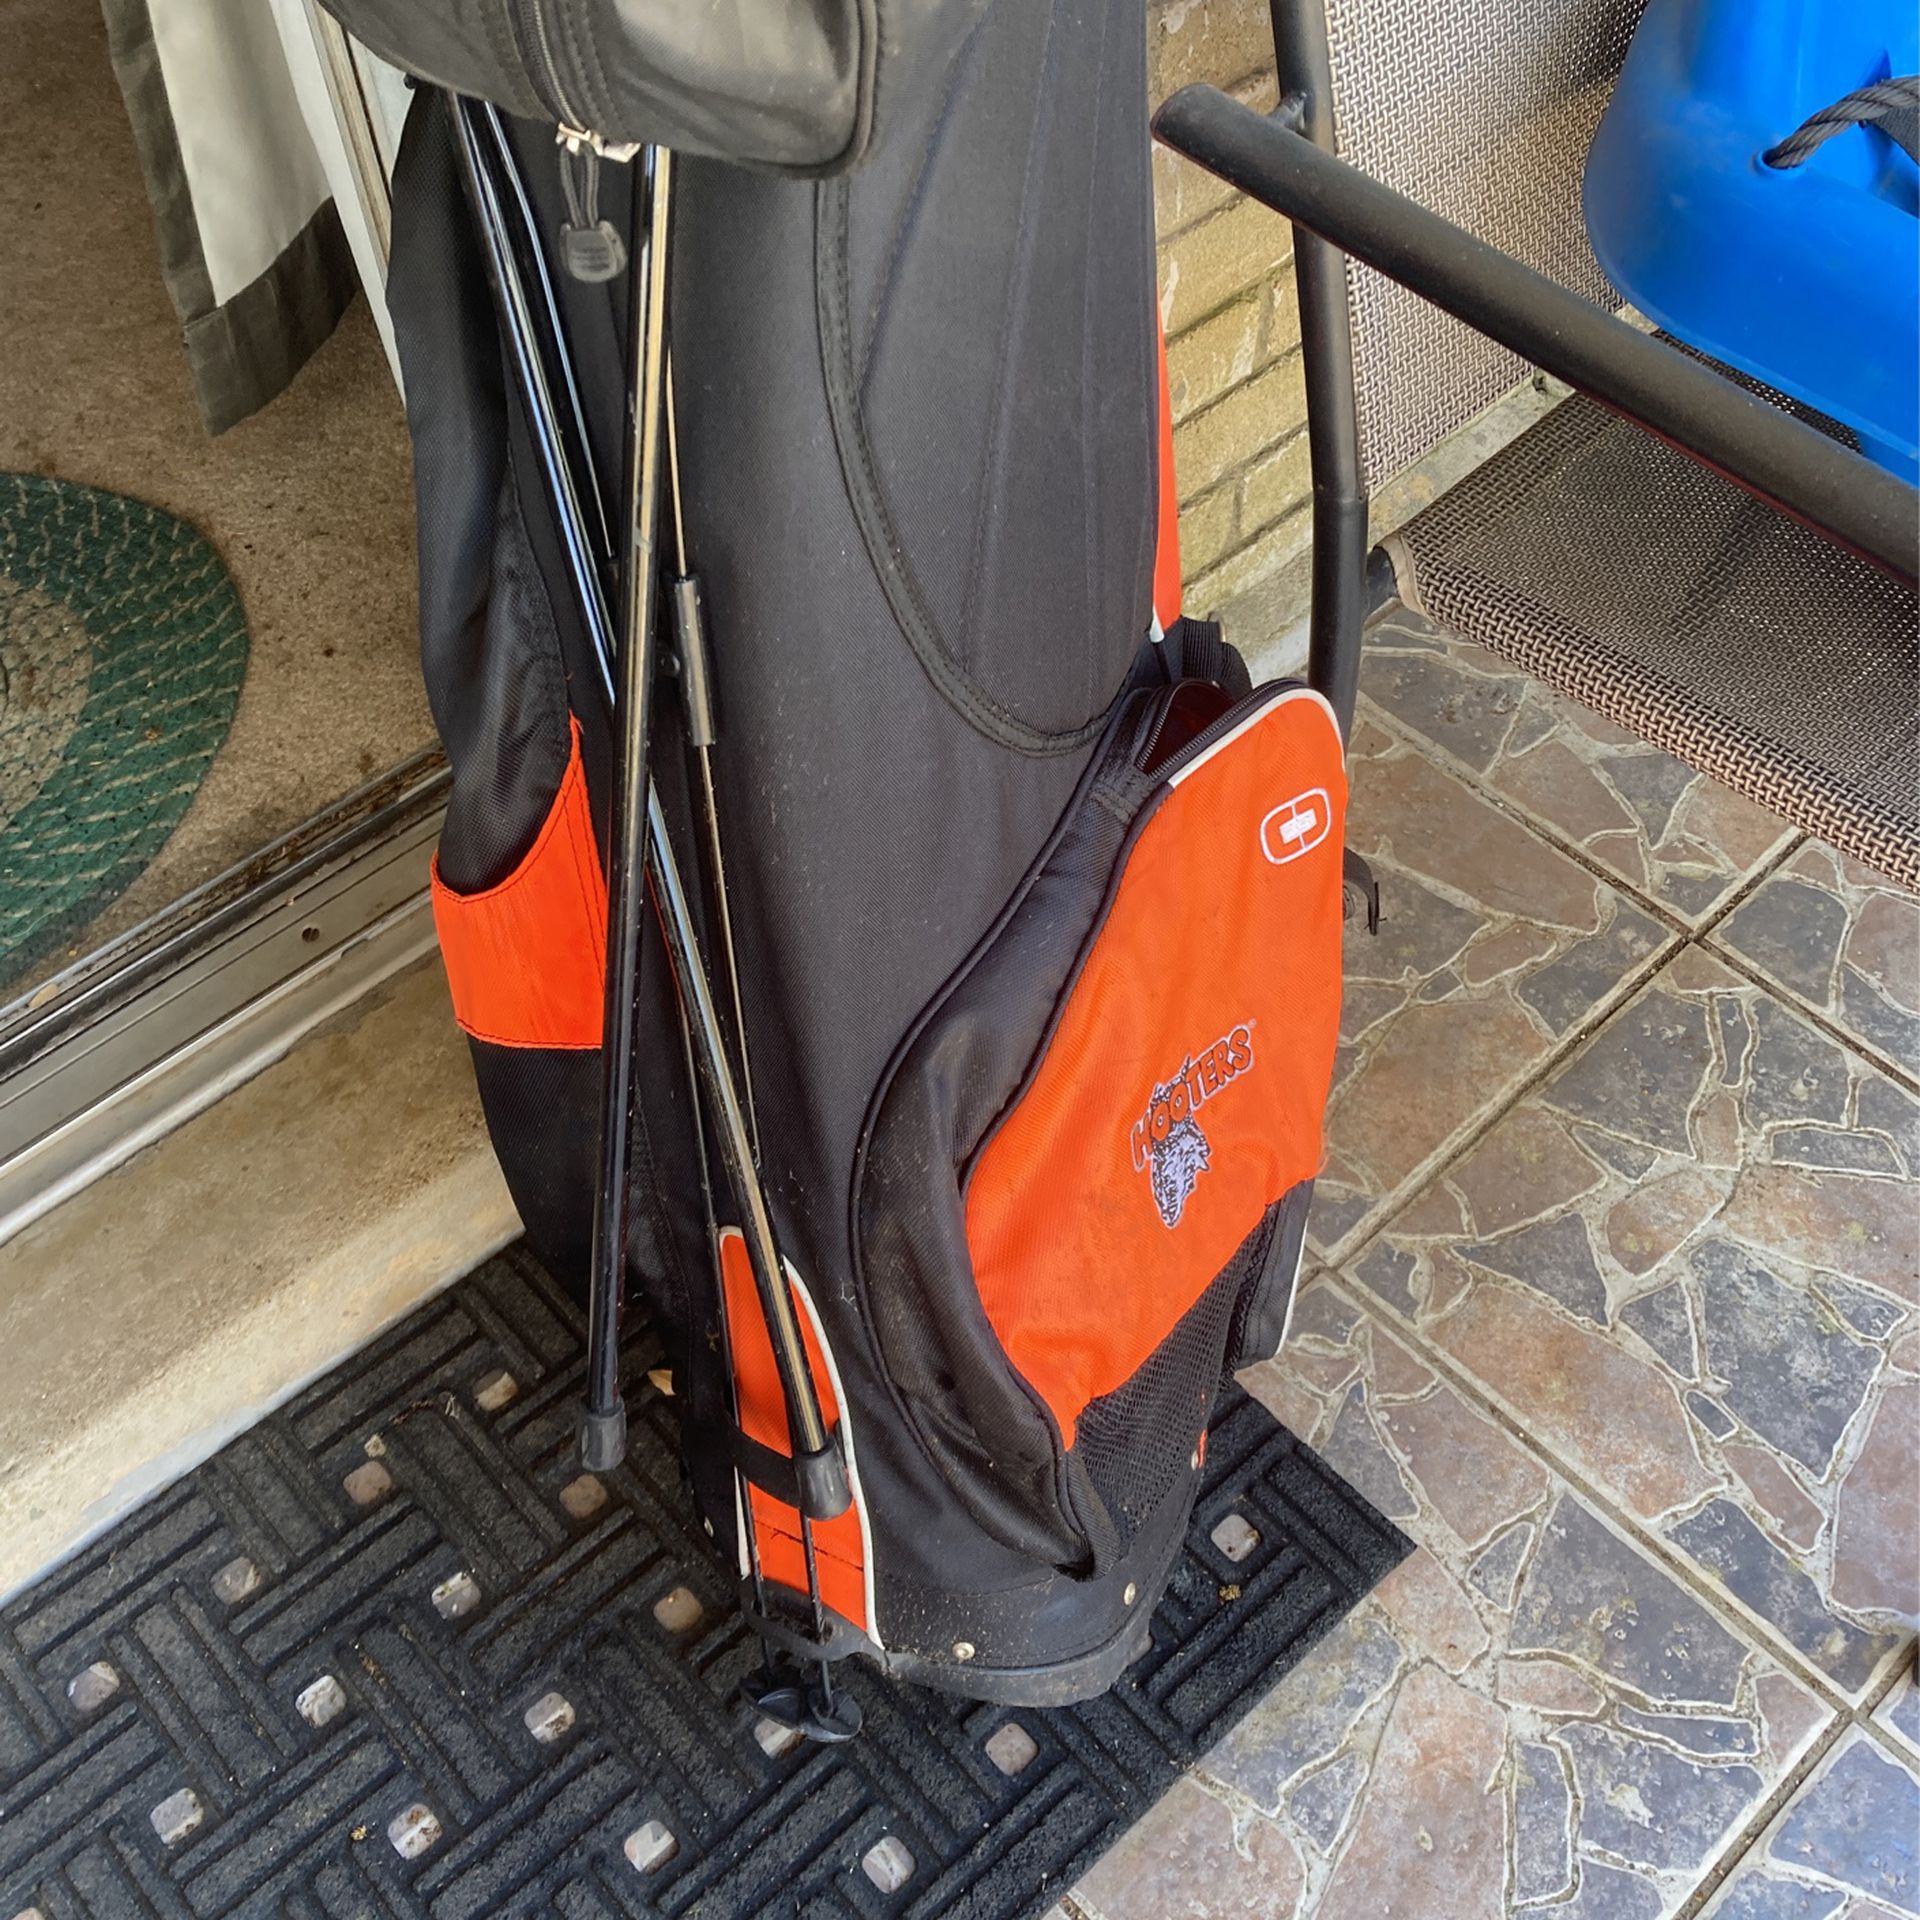 Ghost Golf Bag for Sale in San Antonio, TX - OfferUp